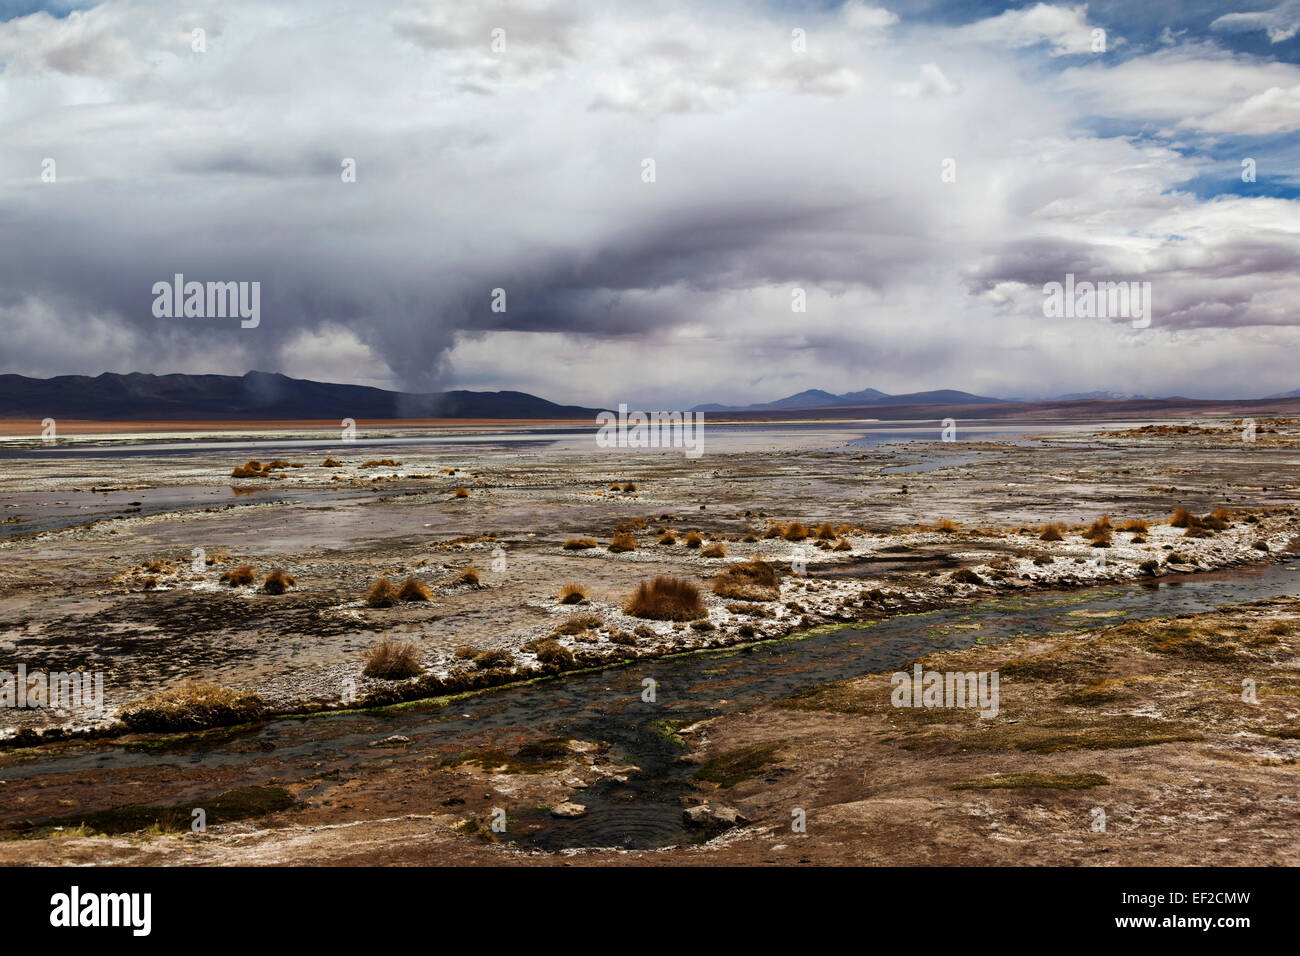 Termas de Polques, Laguna Salada hot springs with waterspouts forming, Bolivian Altiplano or Plateau, Bolivia, South America Stock Photo